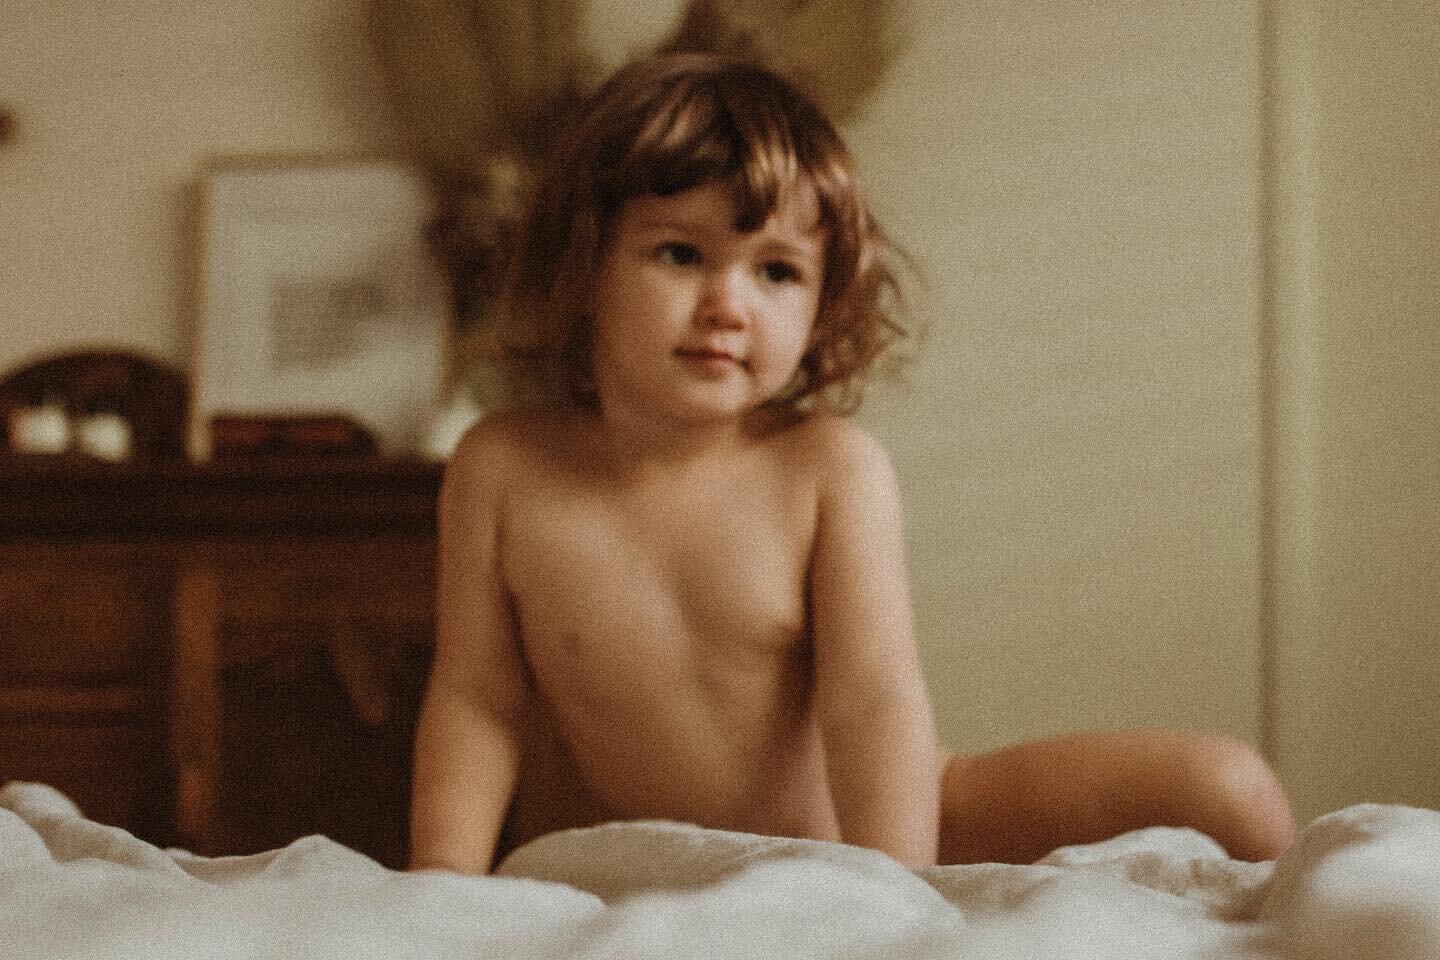 Saturday mornings with my Tilly girl who has no time for clothes or personal space.

I&rsquo;ll be announcing the winner of my Mother&rsquo;s Day giveaway tomorrow morning, so make sure you get your entry in!